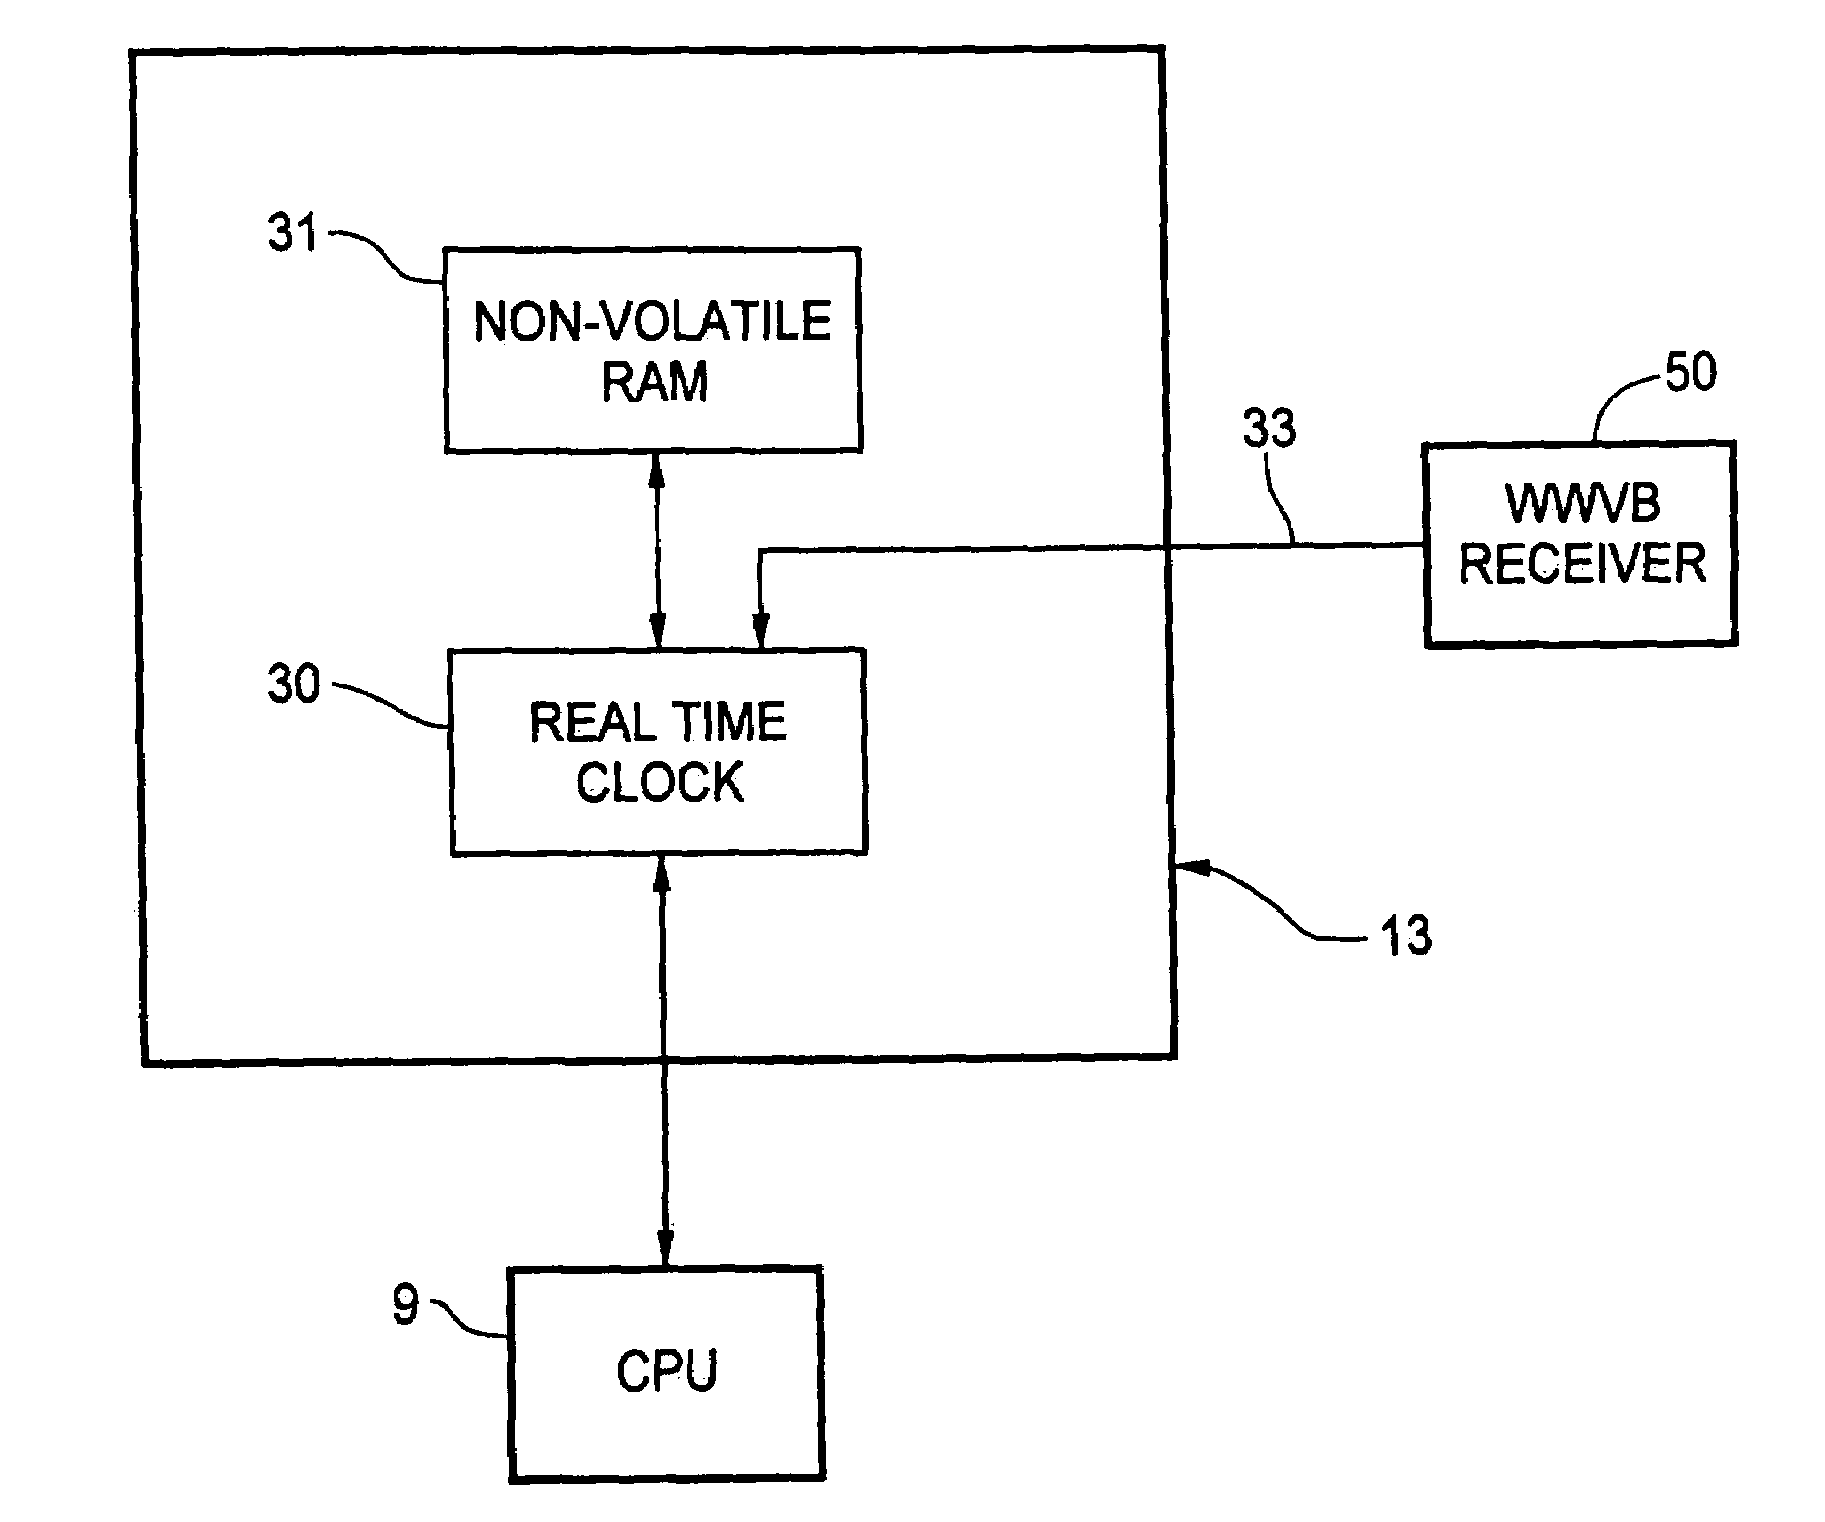 Programmable thermostat employing a fail safe real time clock